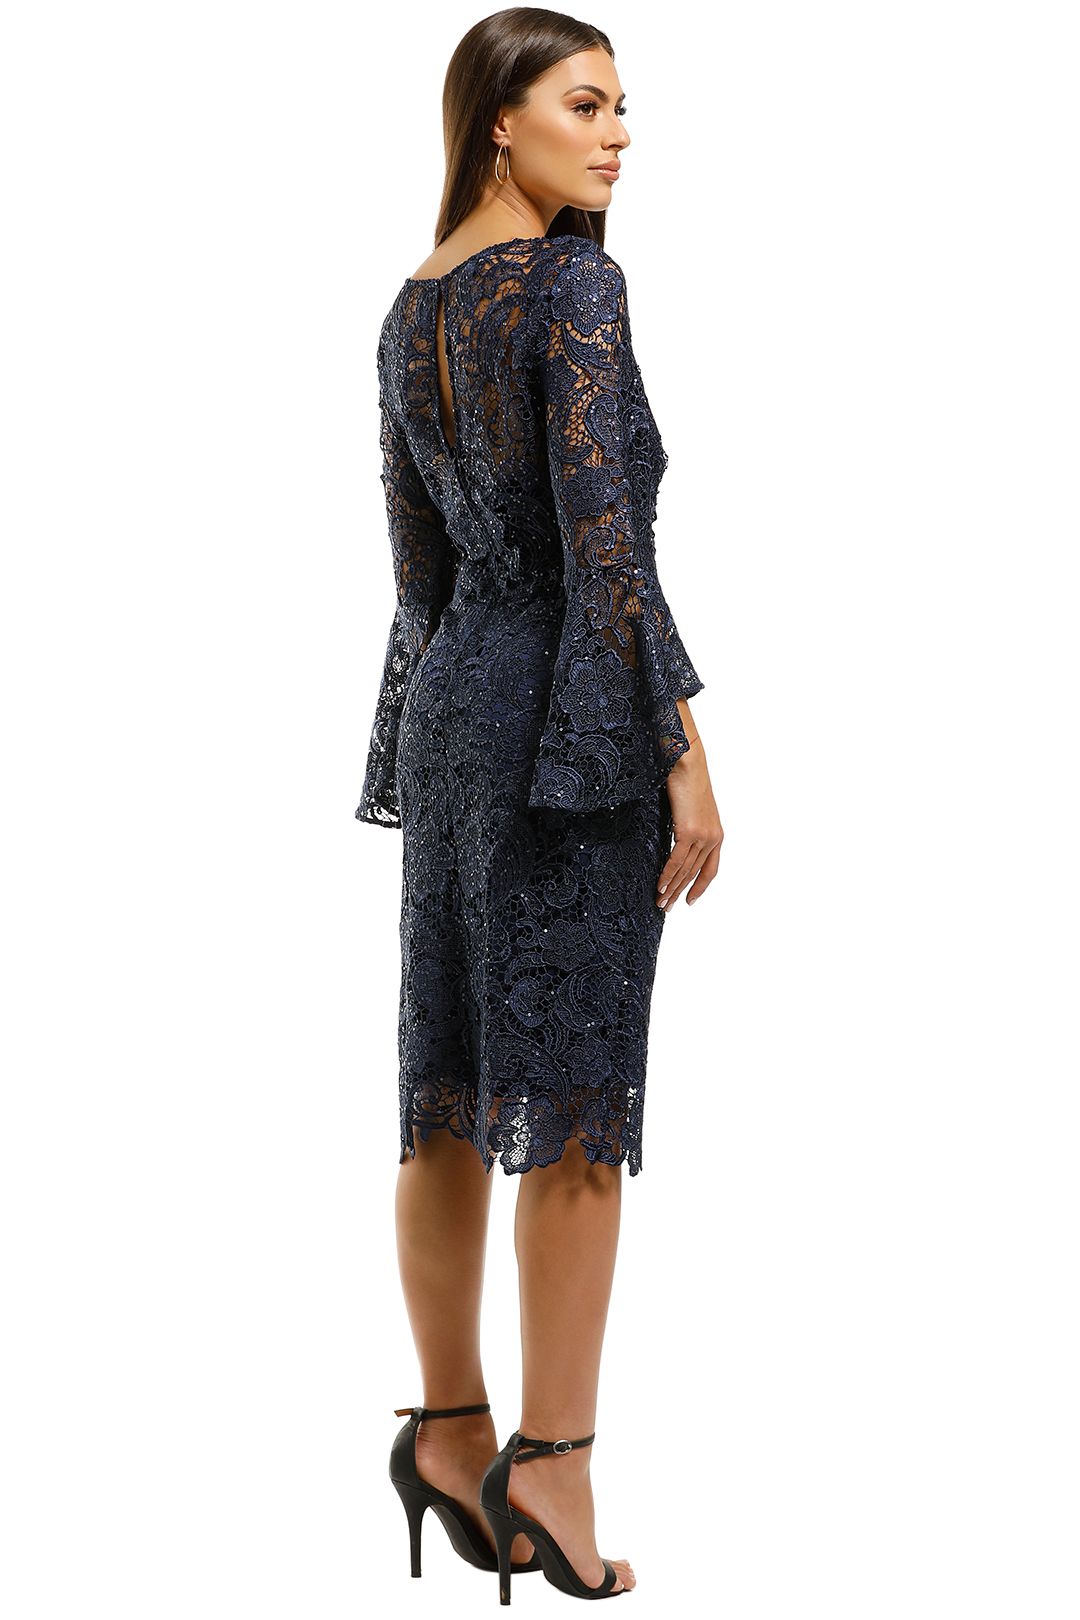 Montique-Chrystella-Lace-and-Sequin-Cocktail-Dress-Back